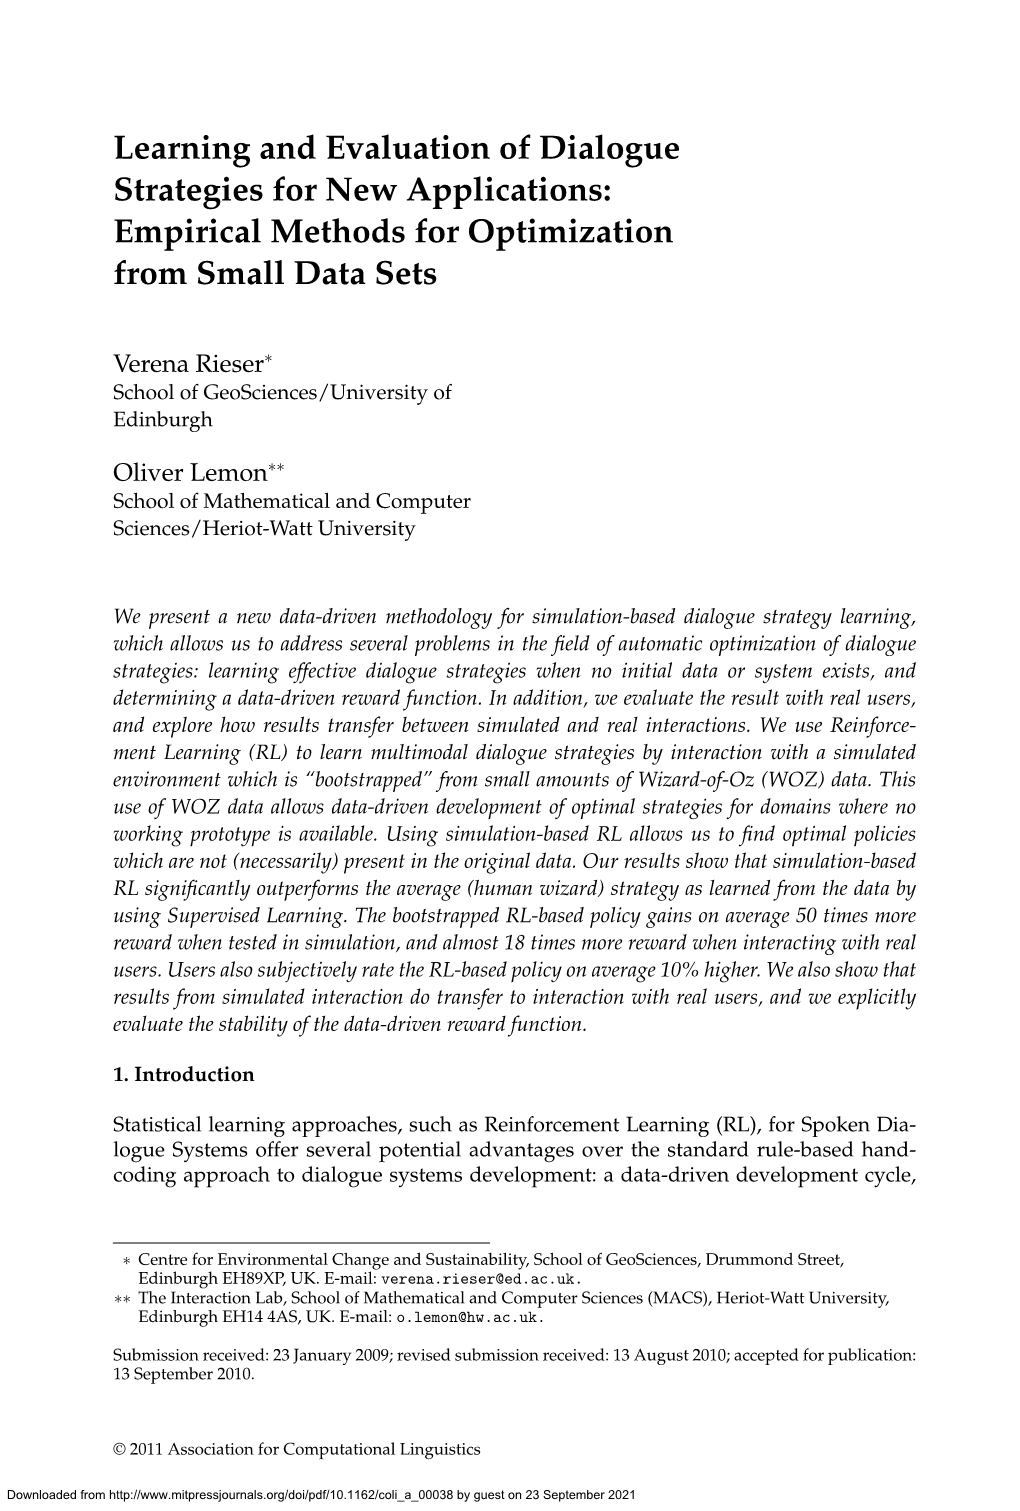 Learning and Evaluation of Dialogue Strategies for New Applications: Empirical Methods for Optimization from Small Data Sets